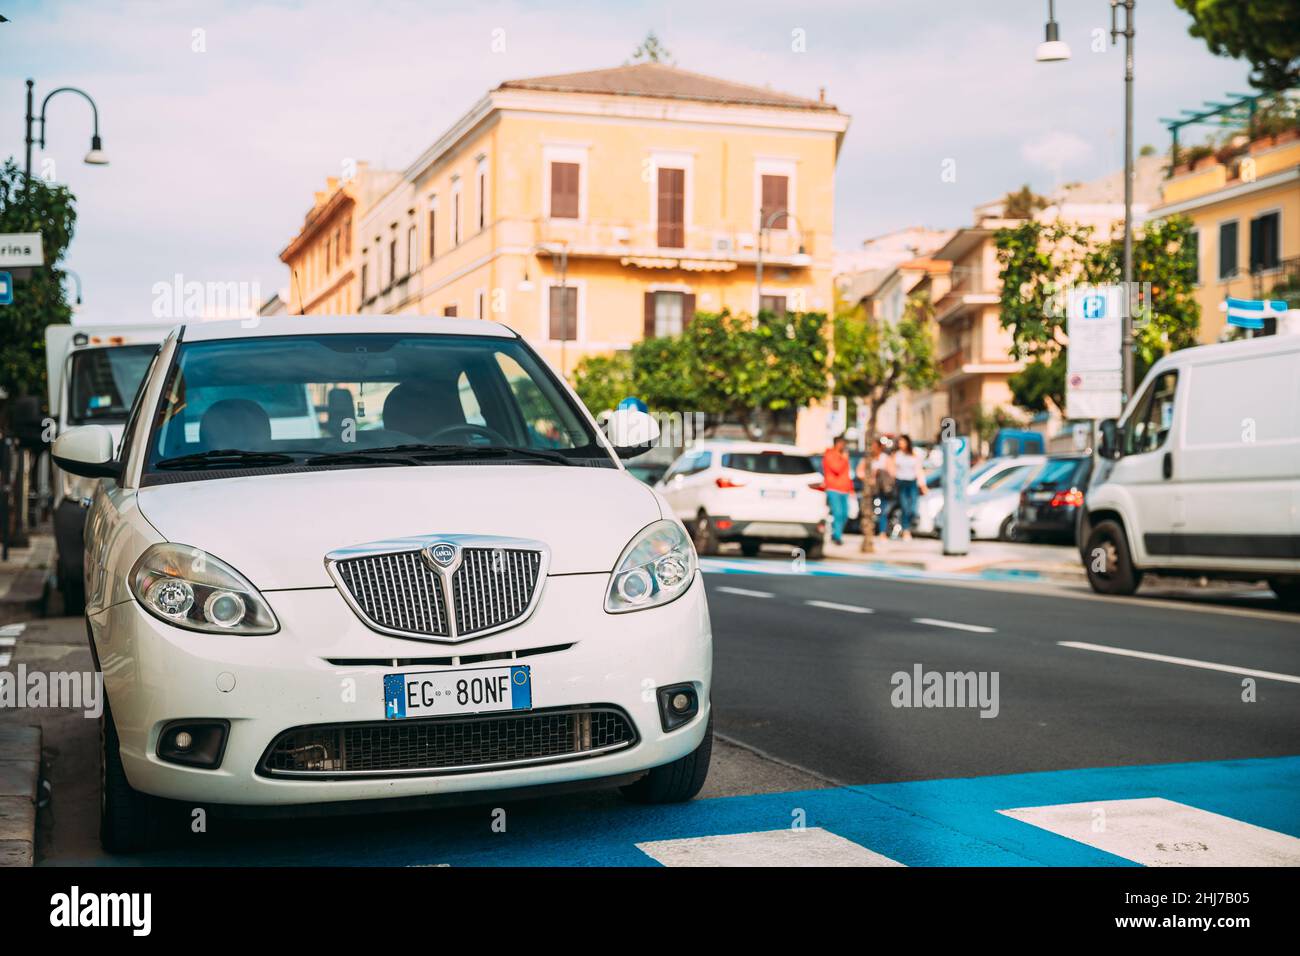 Terracina, Italy. White Color Lancia Ypsilon 843 Facelift Car Of Second Generation Parked On Street Stock Photo